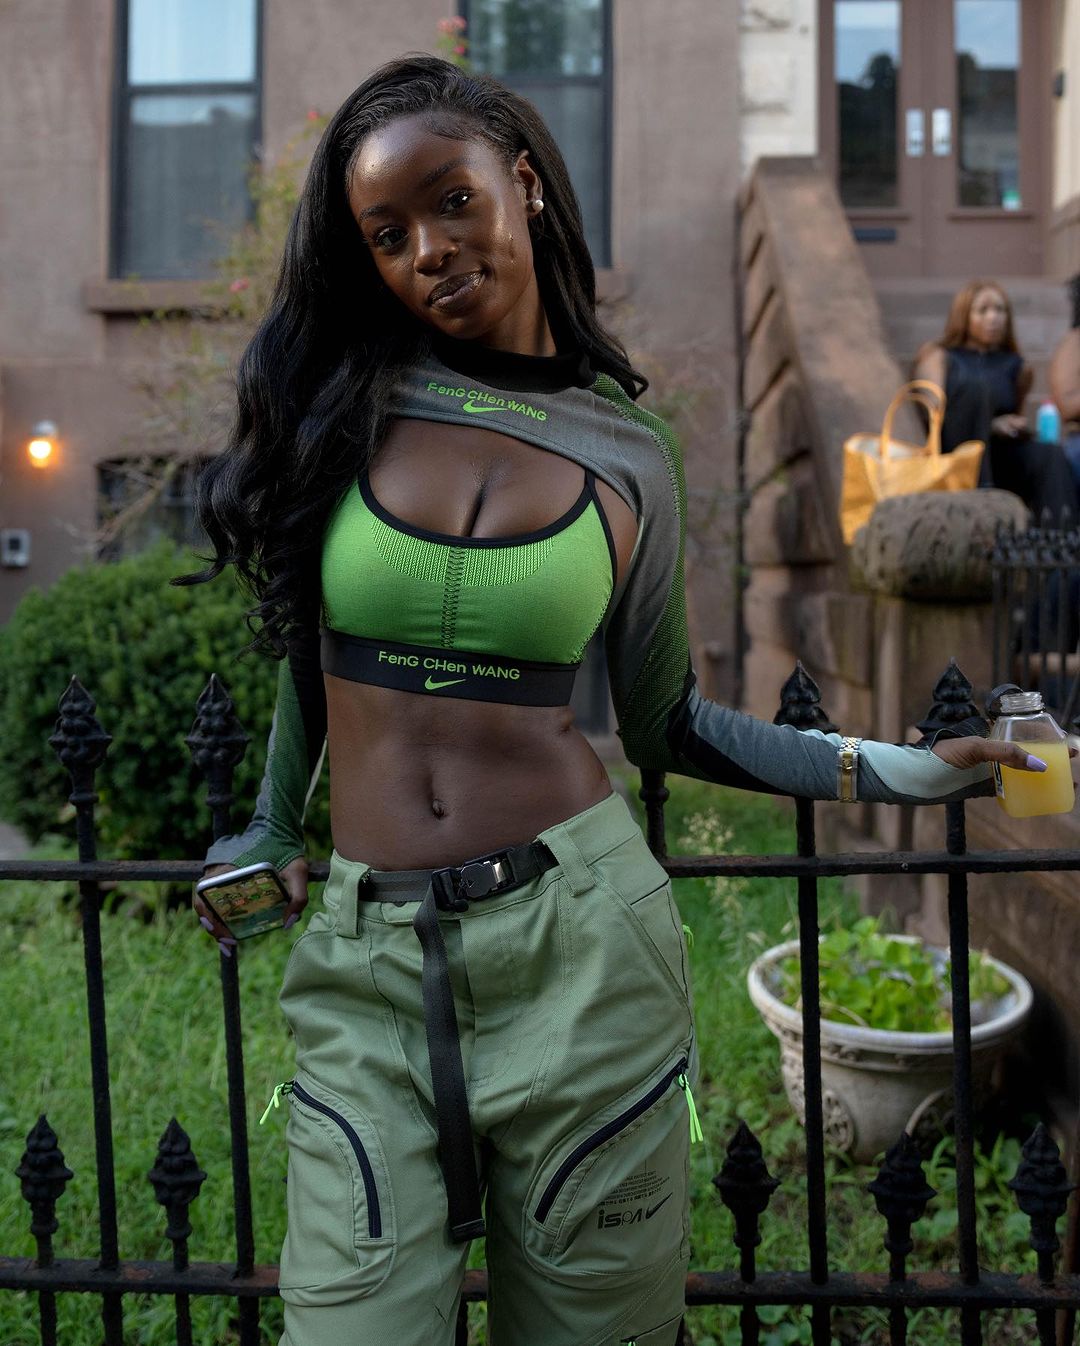 Best Street Style Looks At The To Many More Nike Block Party